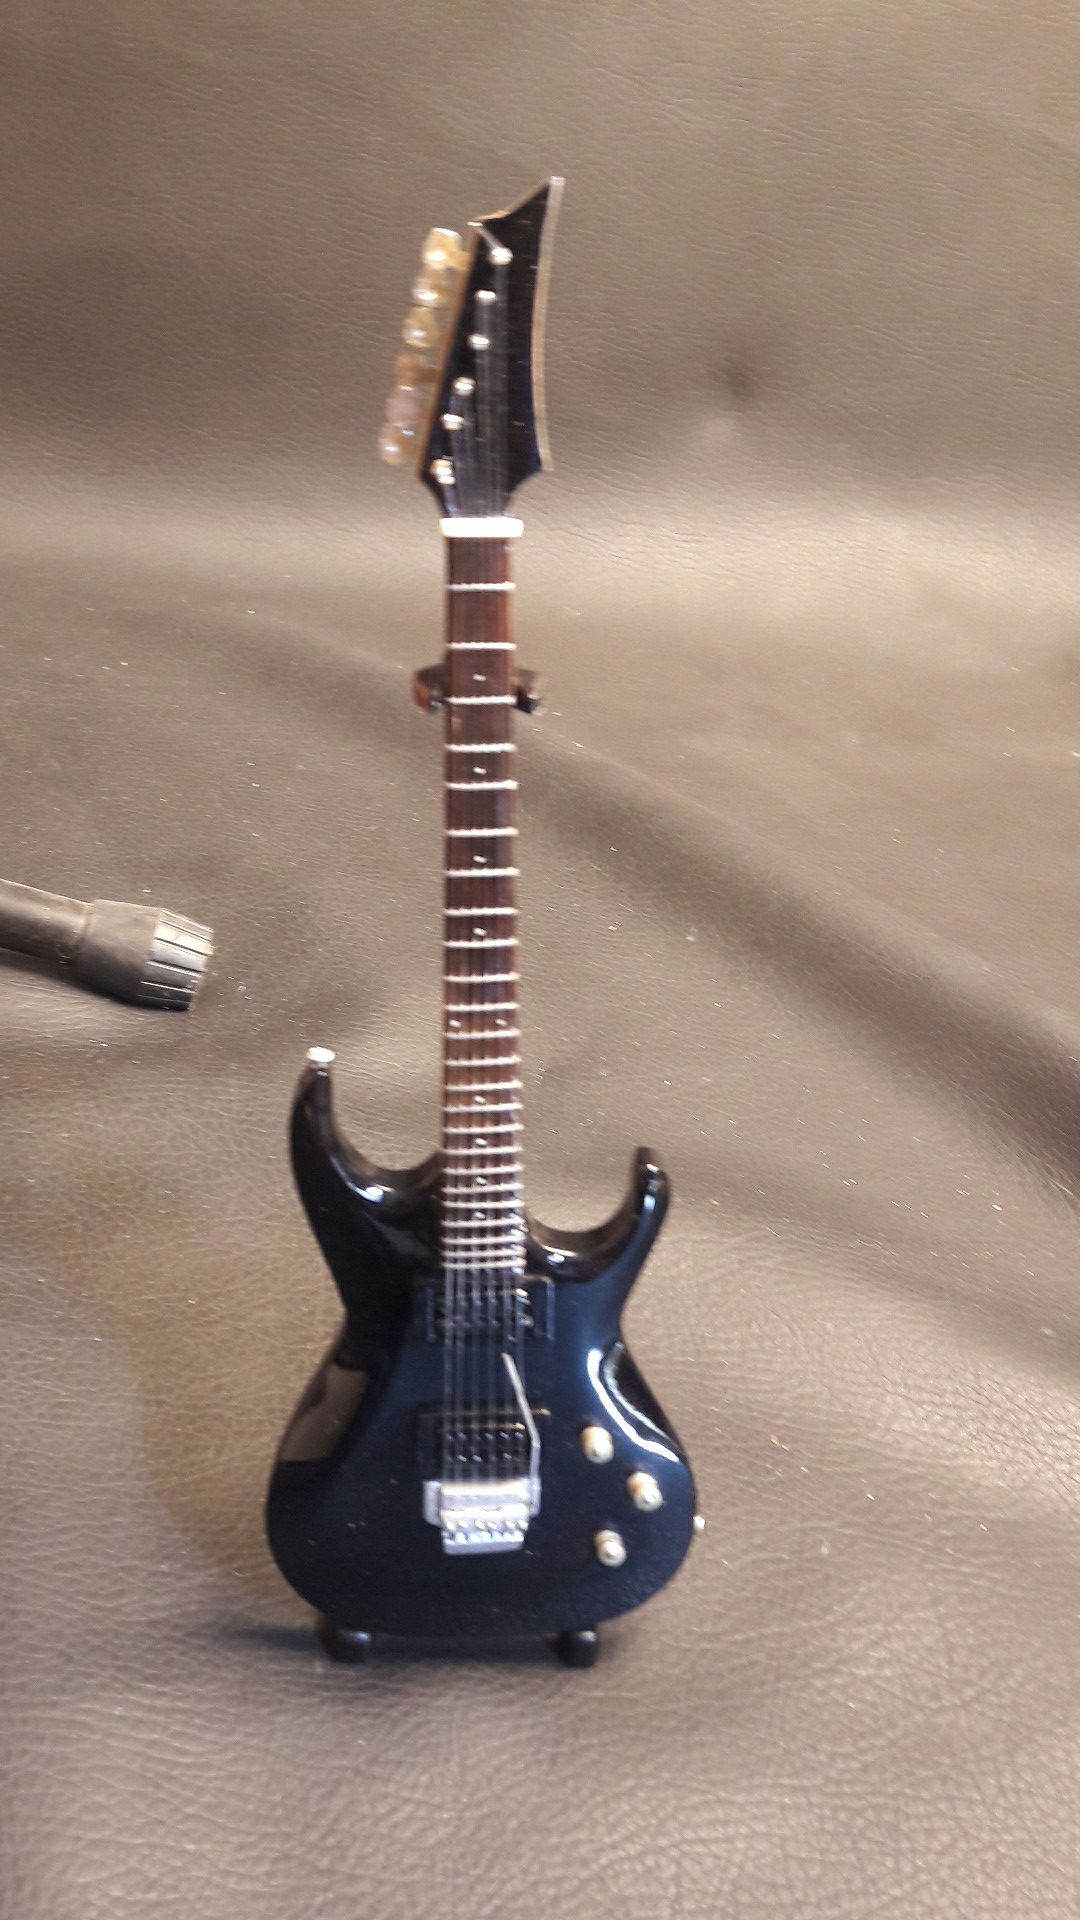 Miniature Black Electric Guitar handcrafted with stand